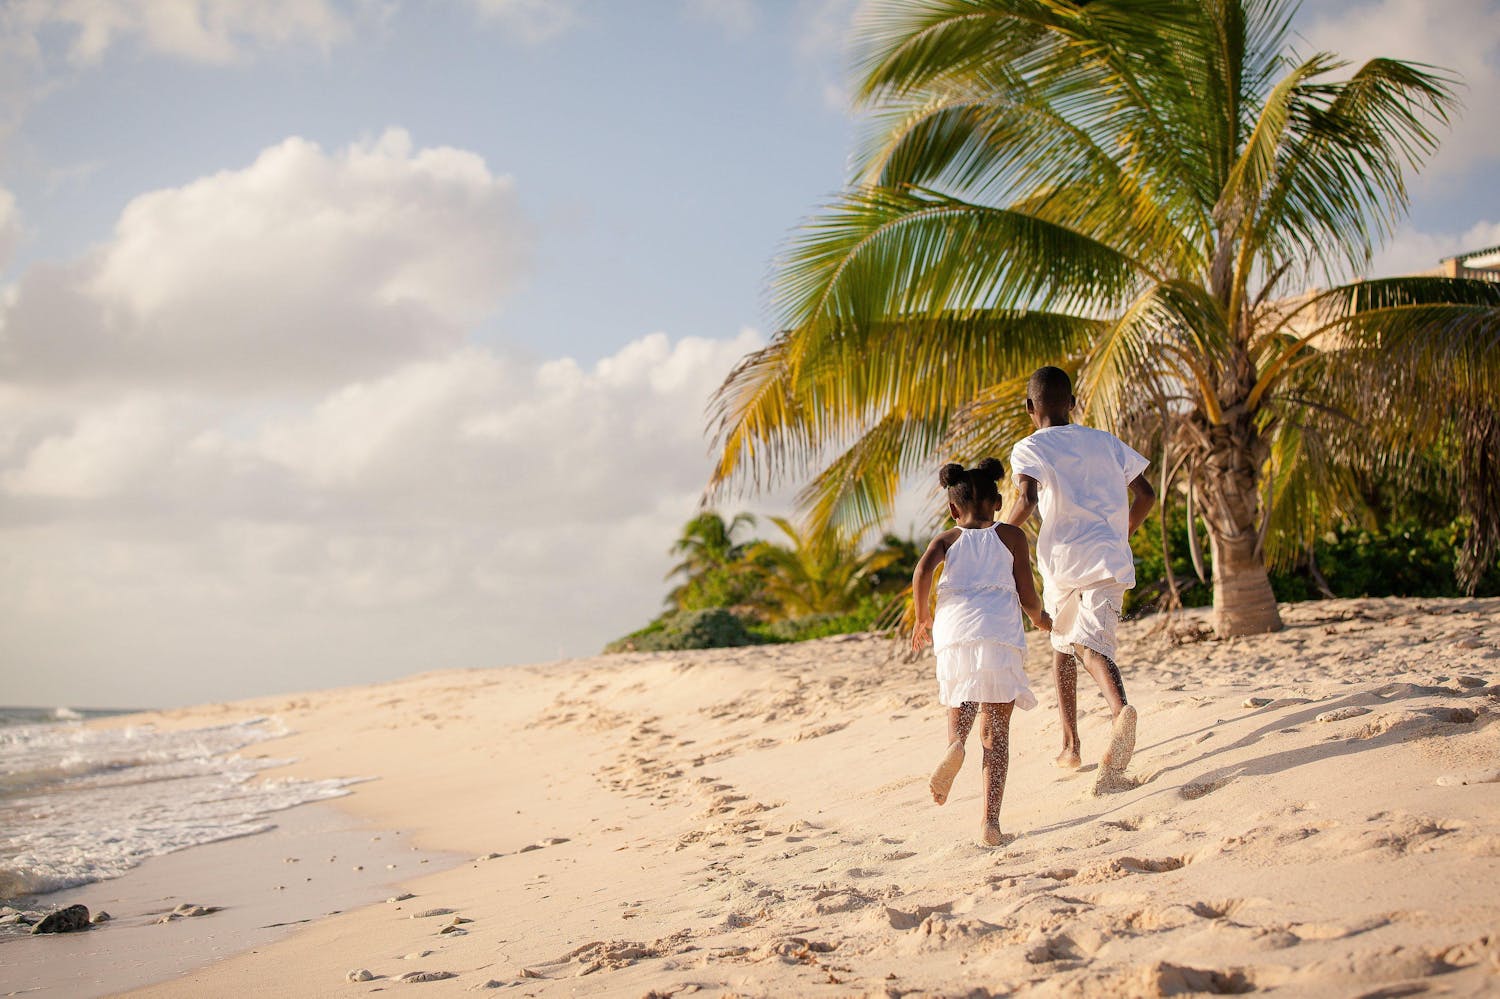 Young girl and boy dressed in white running on the beach